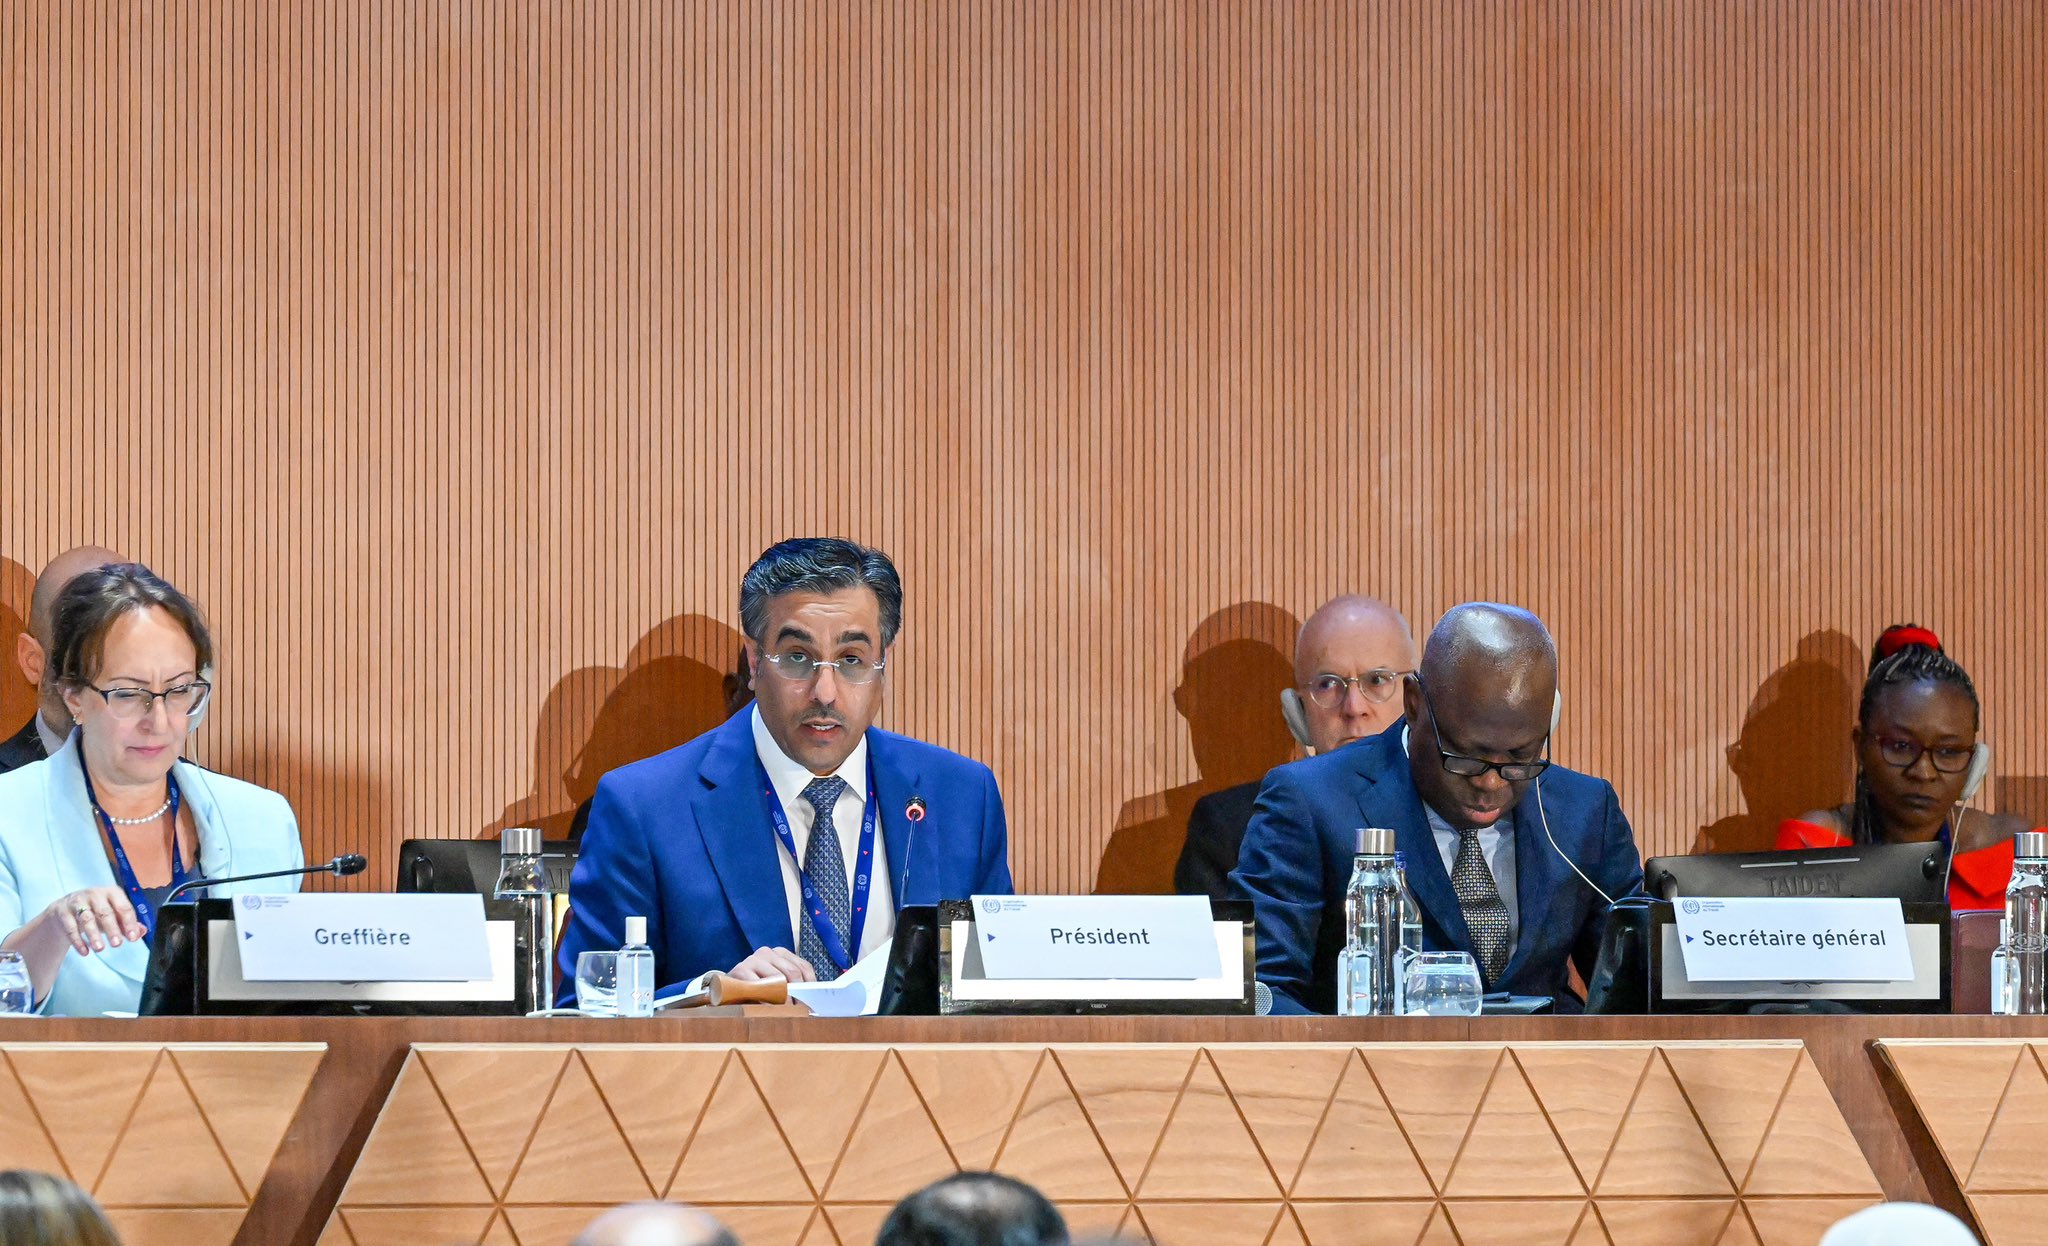 Qatar’s labour minister elected as president of ILO conference for first time